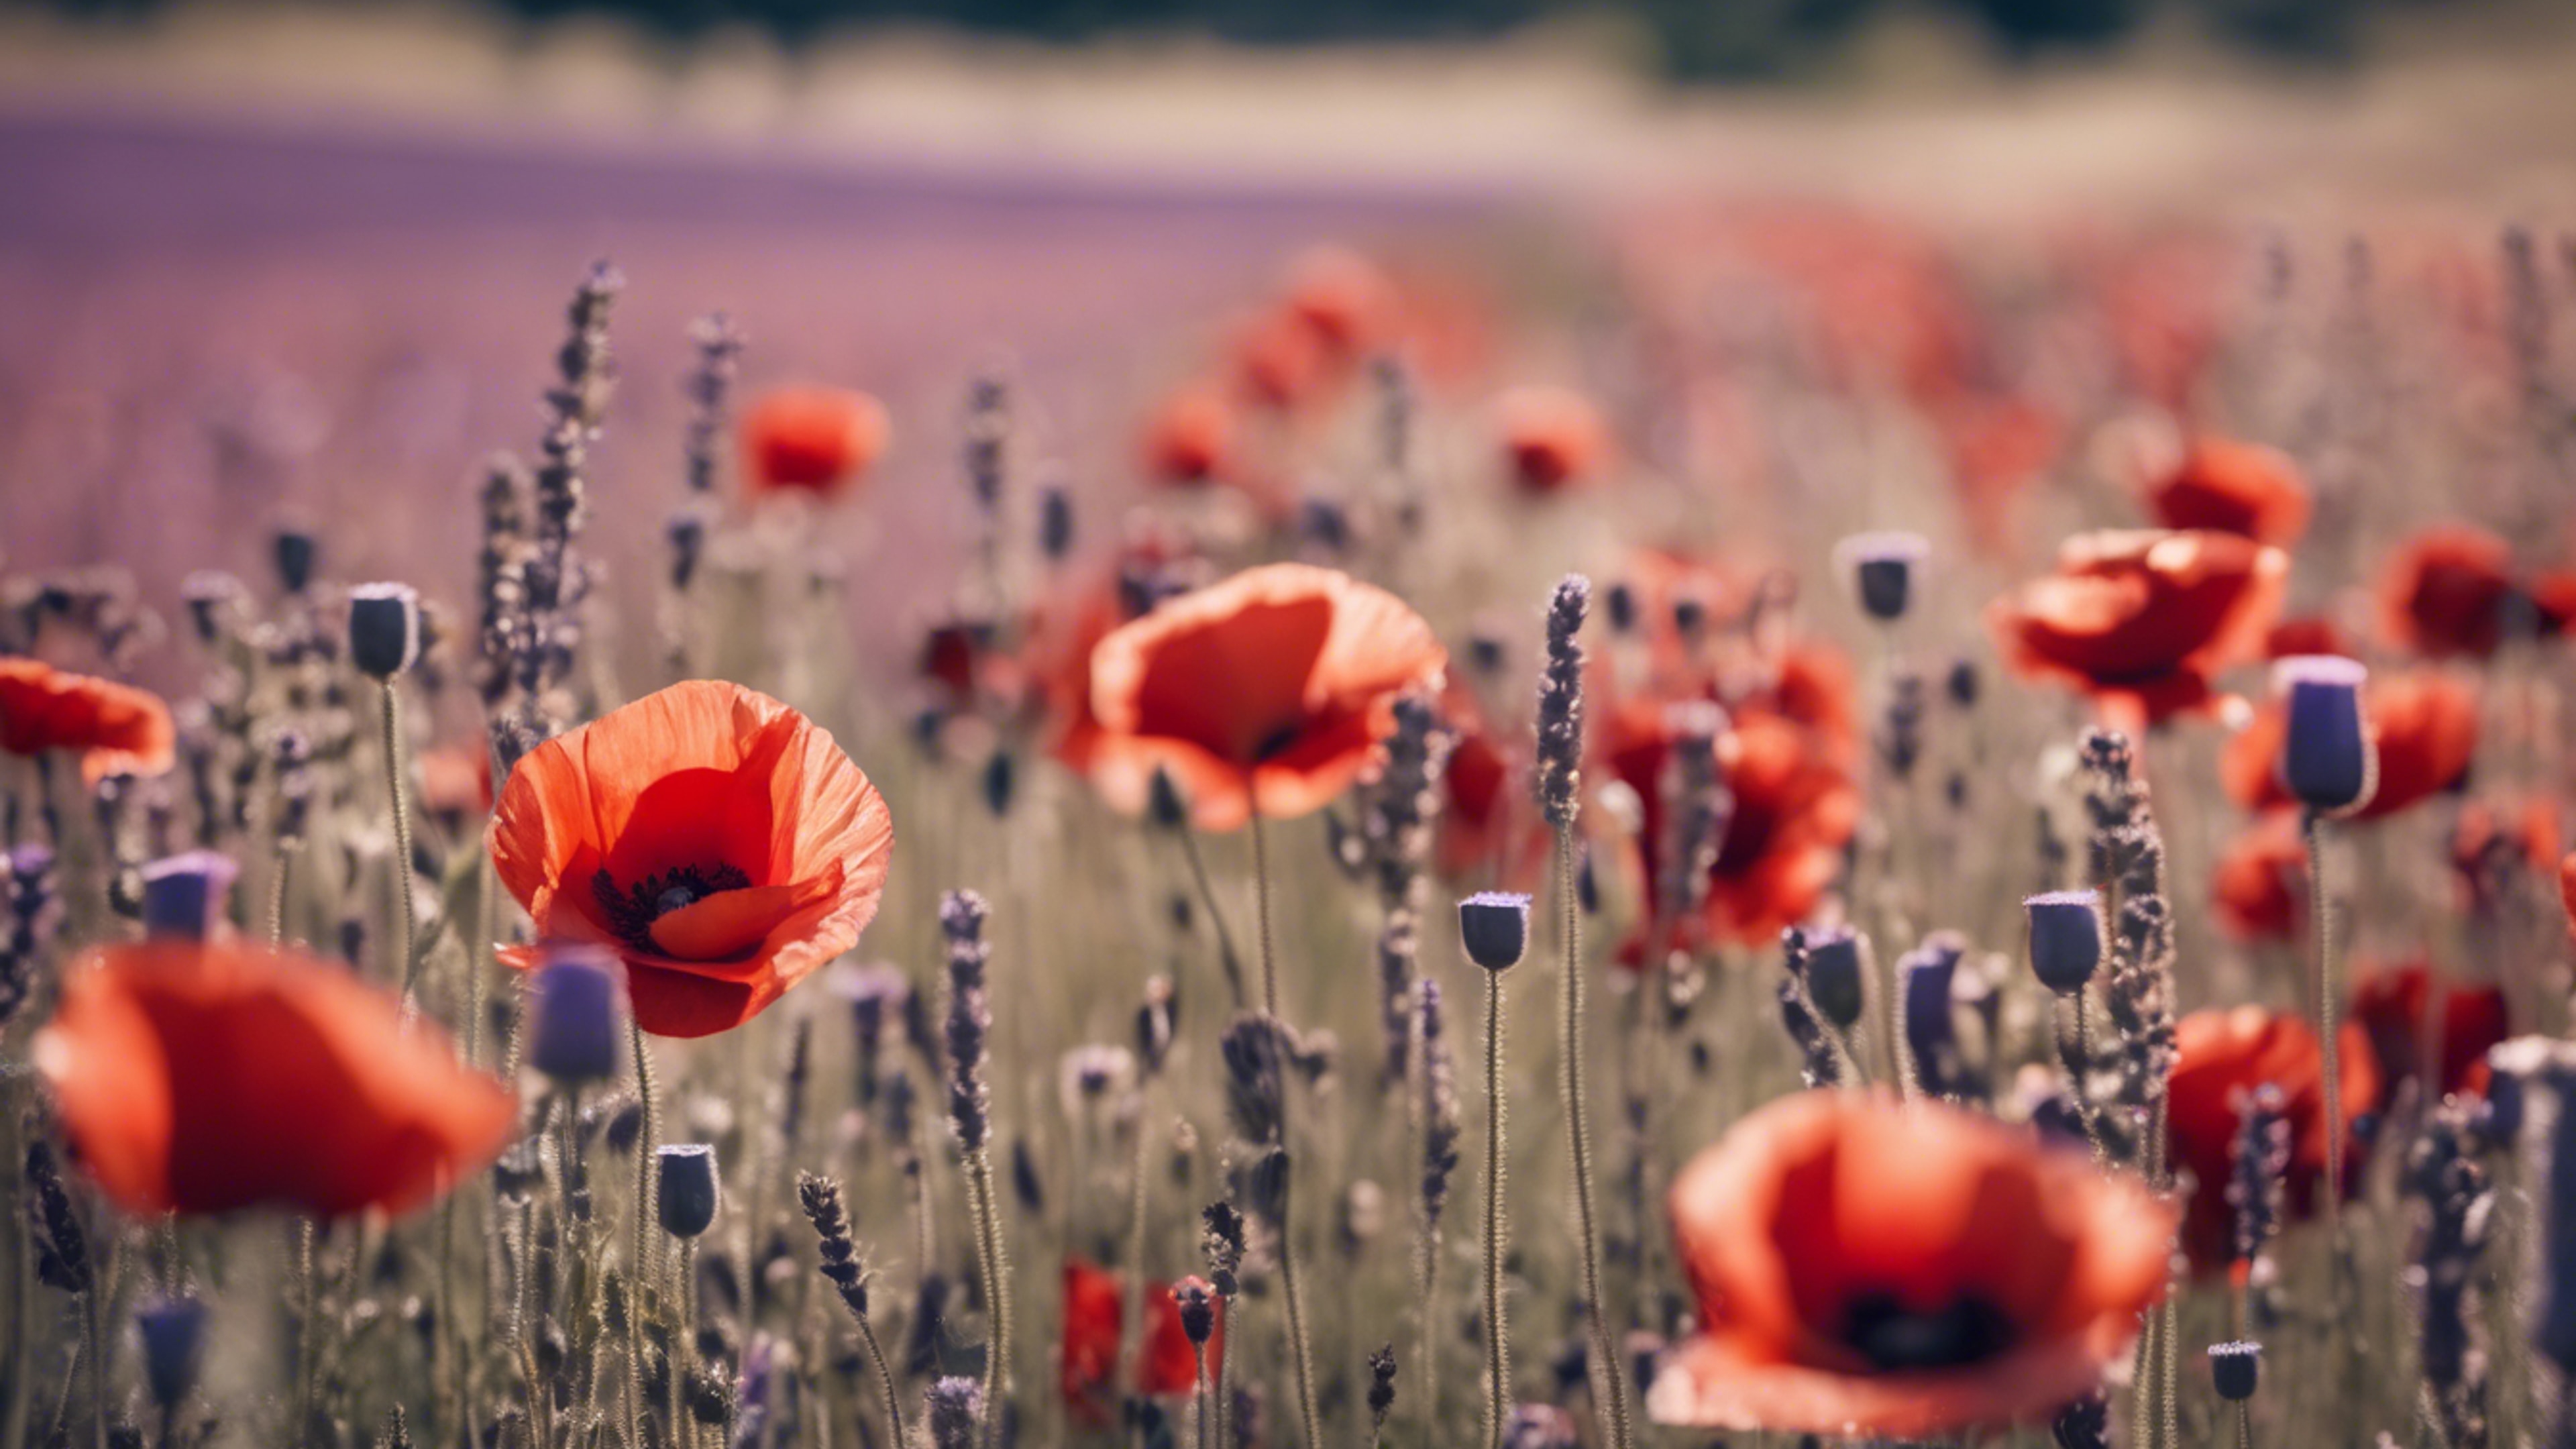 A field of red poppies naturally fading into a lavender field.壁紙[76e938c2507742cfb107]